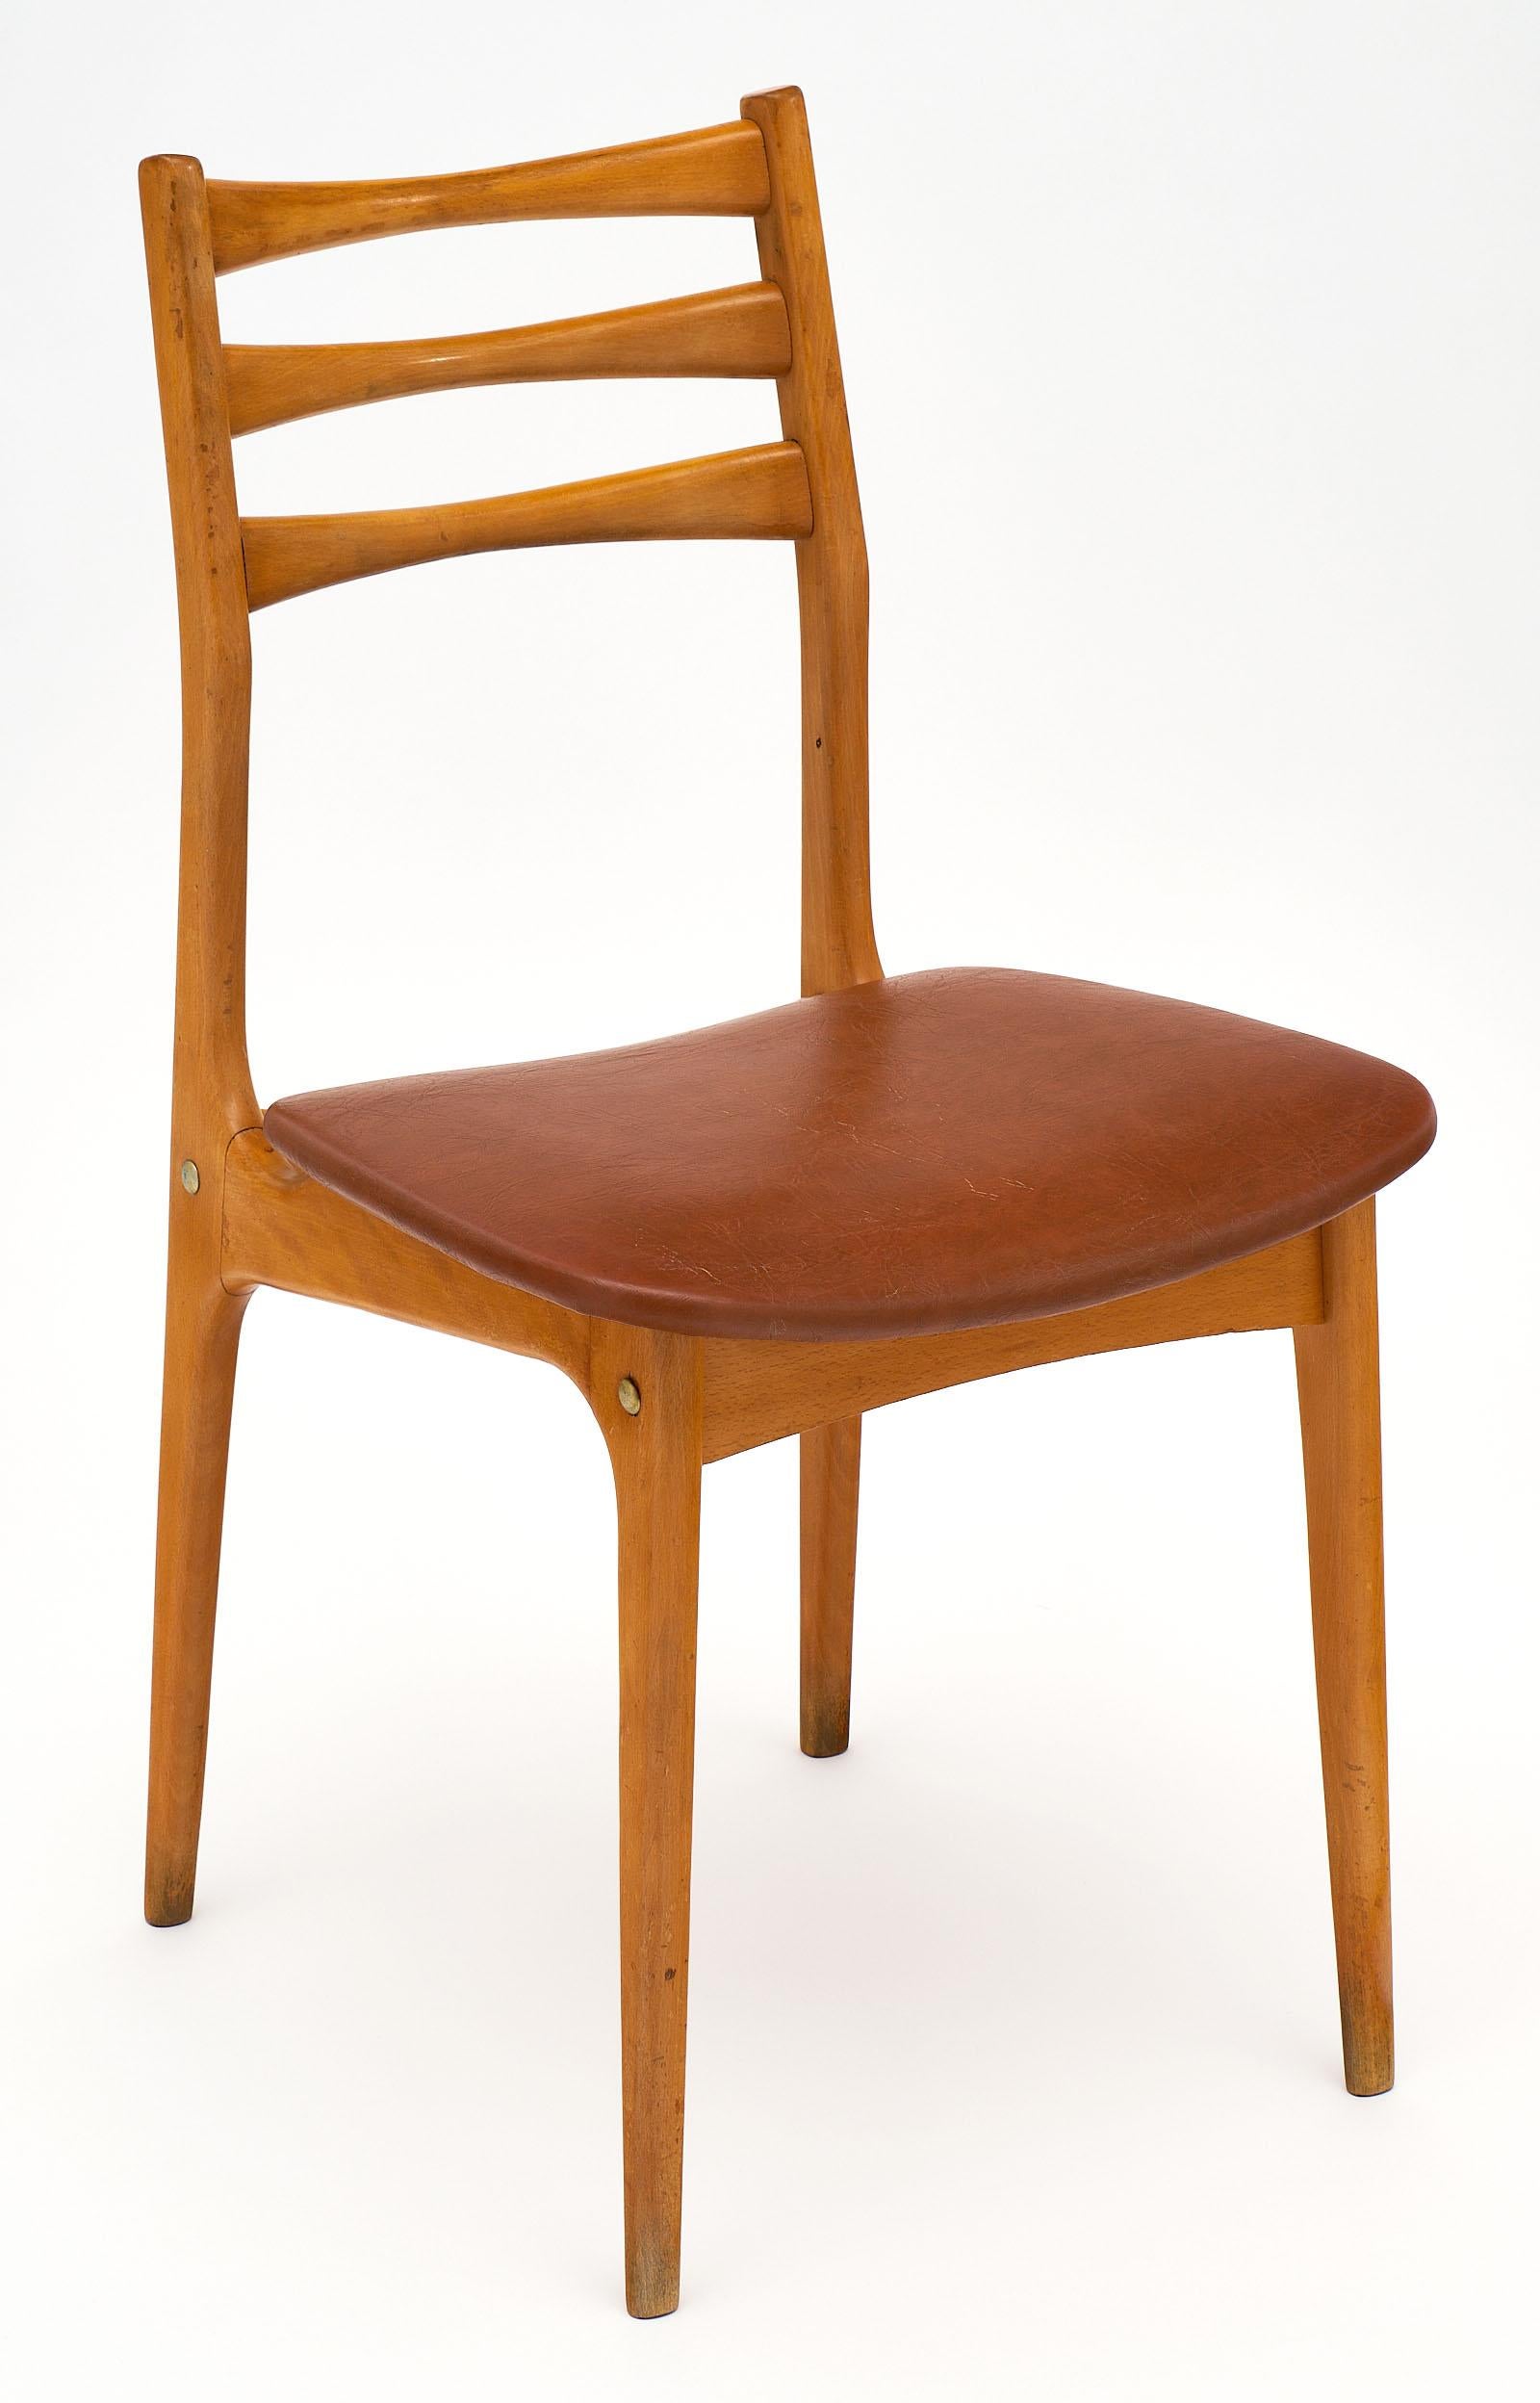 A set of six midcentury French cherrywood chairs finely crafted of with stylish, strong, and comfortable frames. The original vinyl seats have been professionally repaired, please see the photo for details.